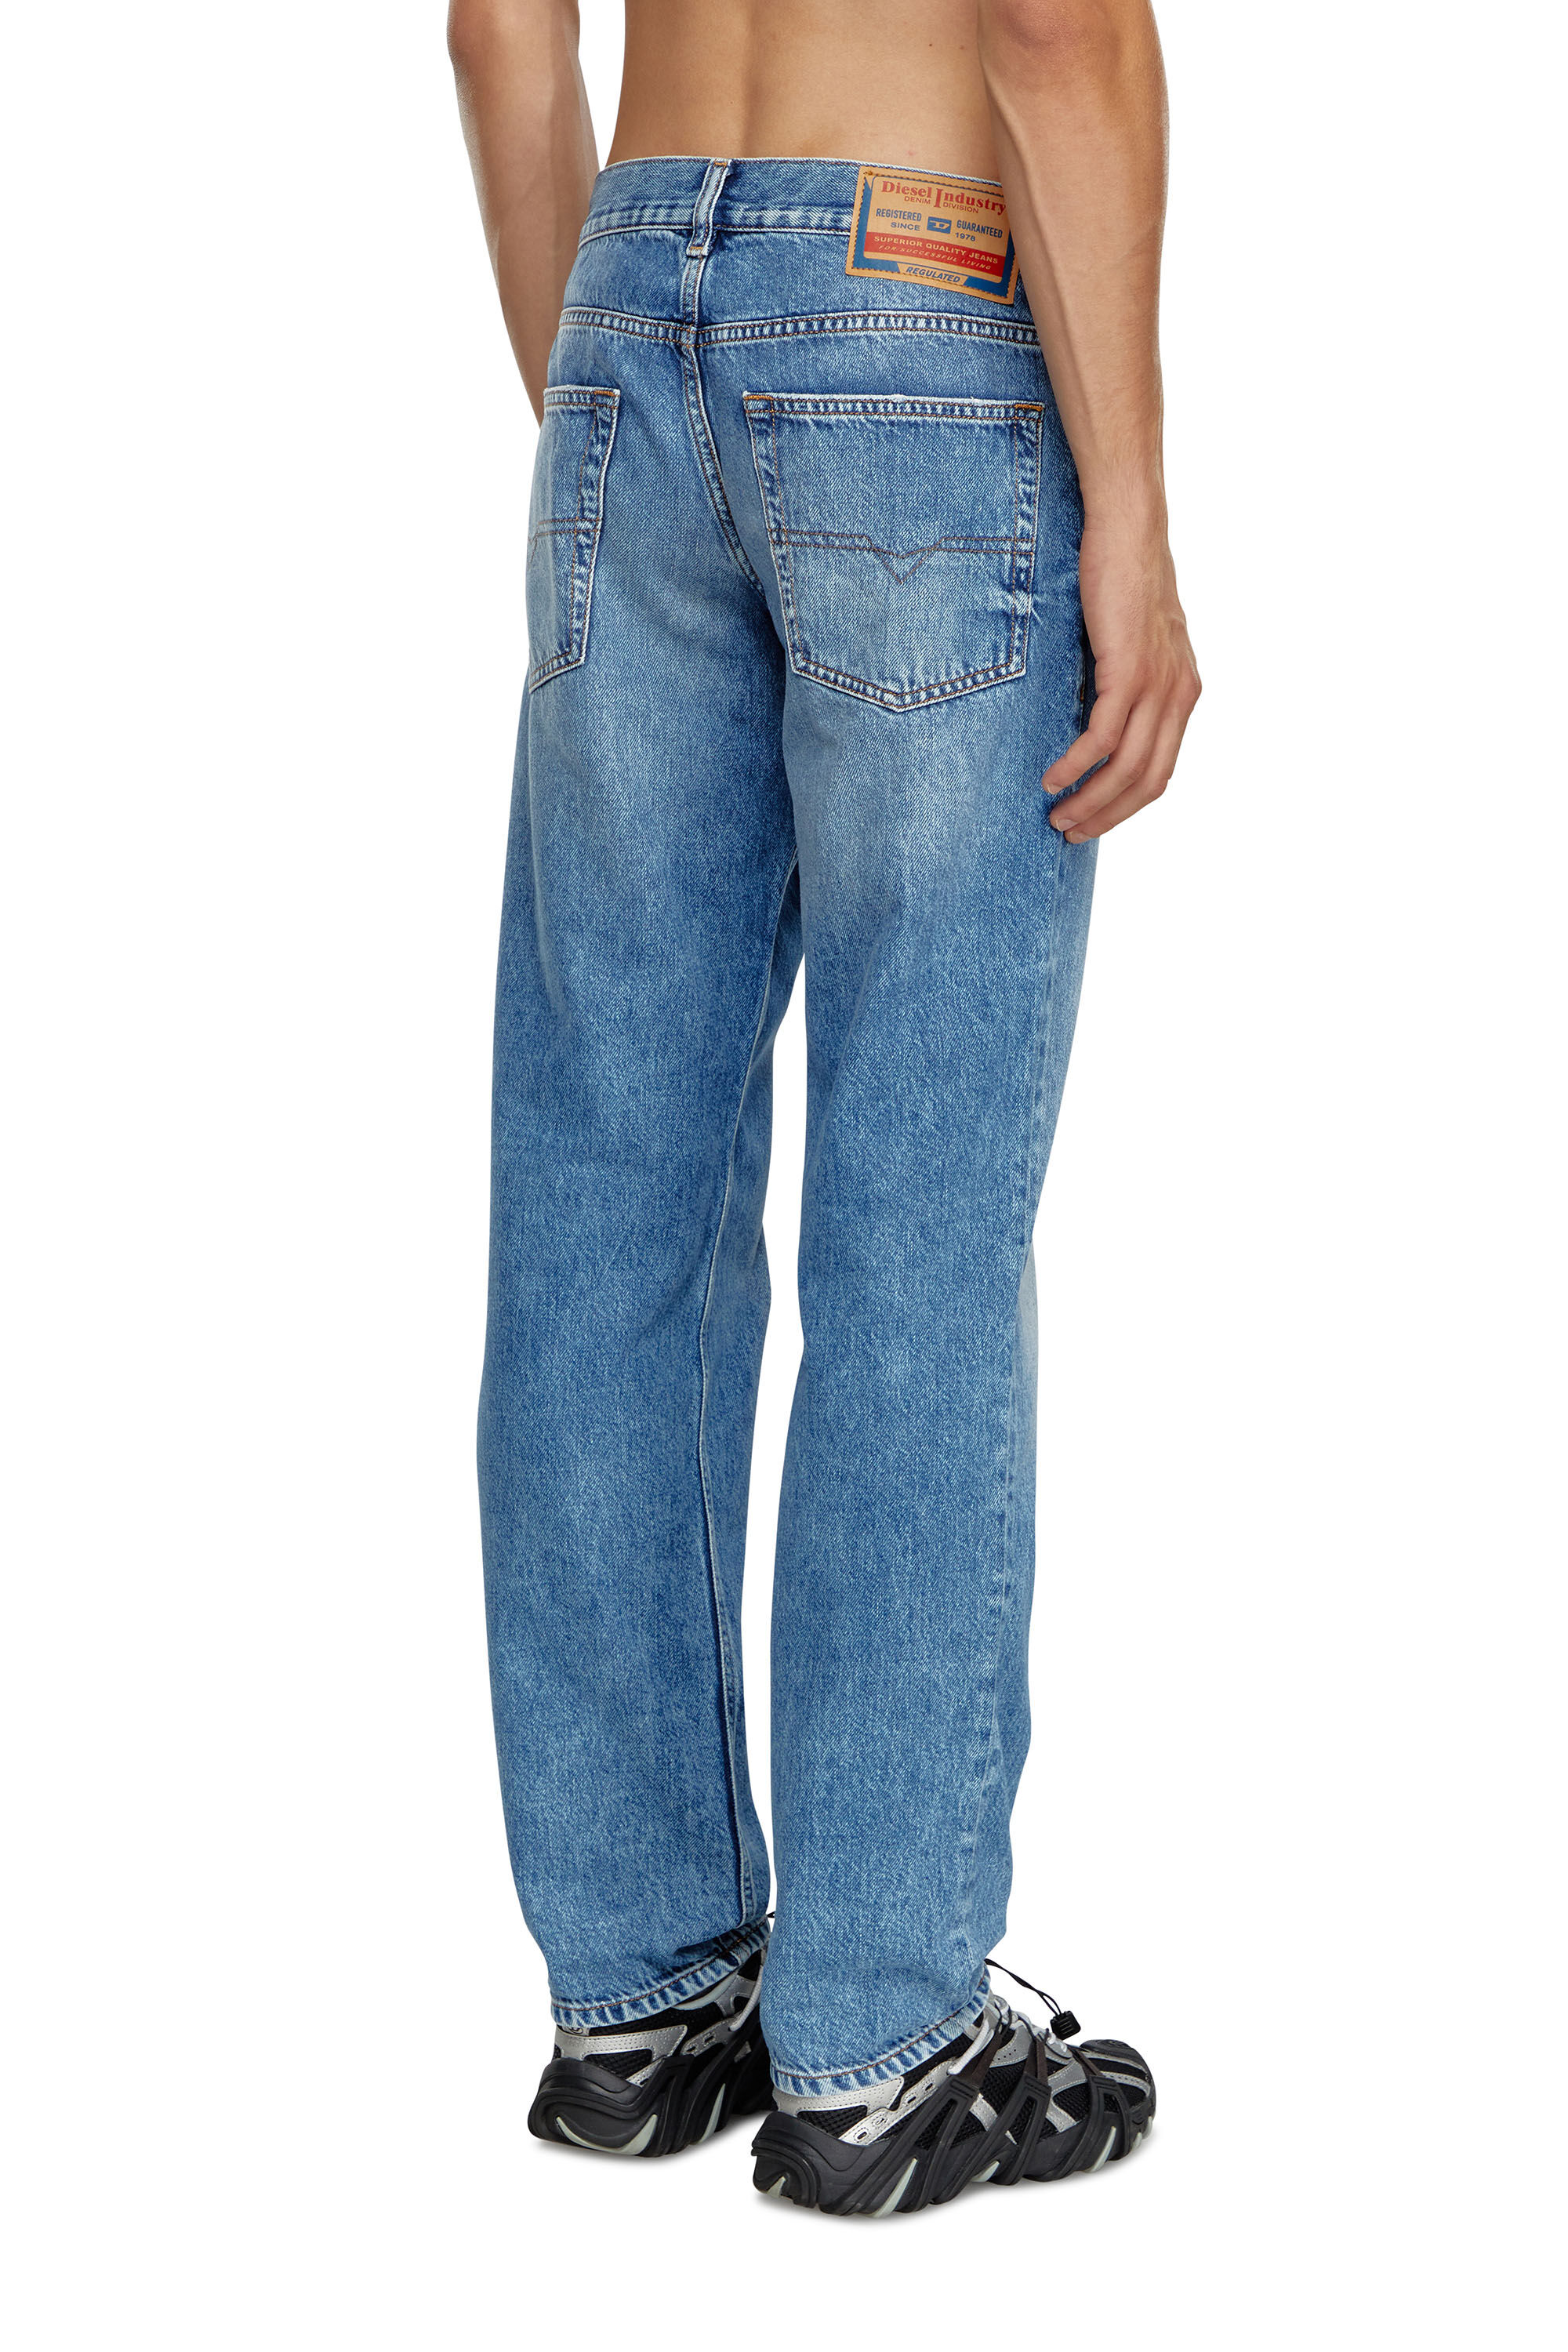 Diesel - Tapered Jeans 2023 D-Finitive 09H95, Hombre Tapered Jeans - 2023 D-Finitive in Azul marino - Image 4